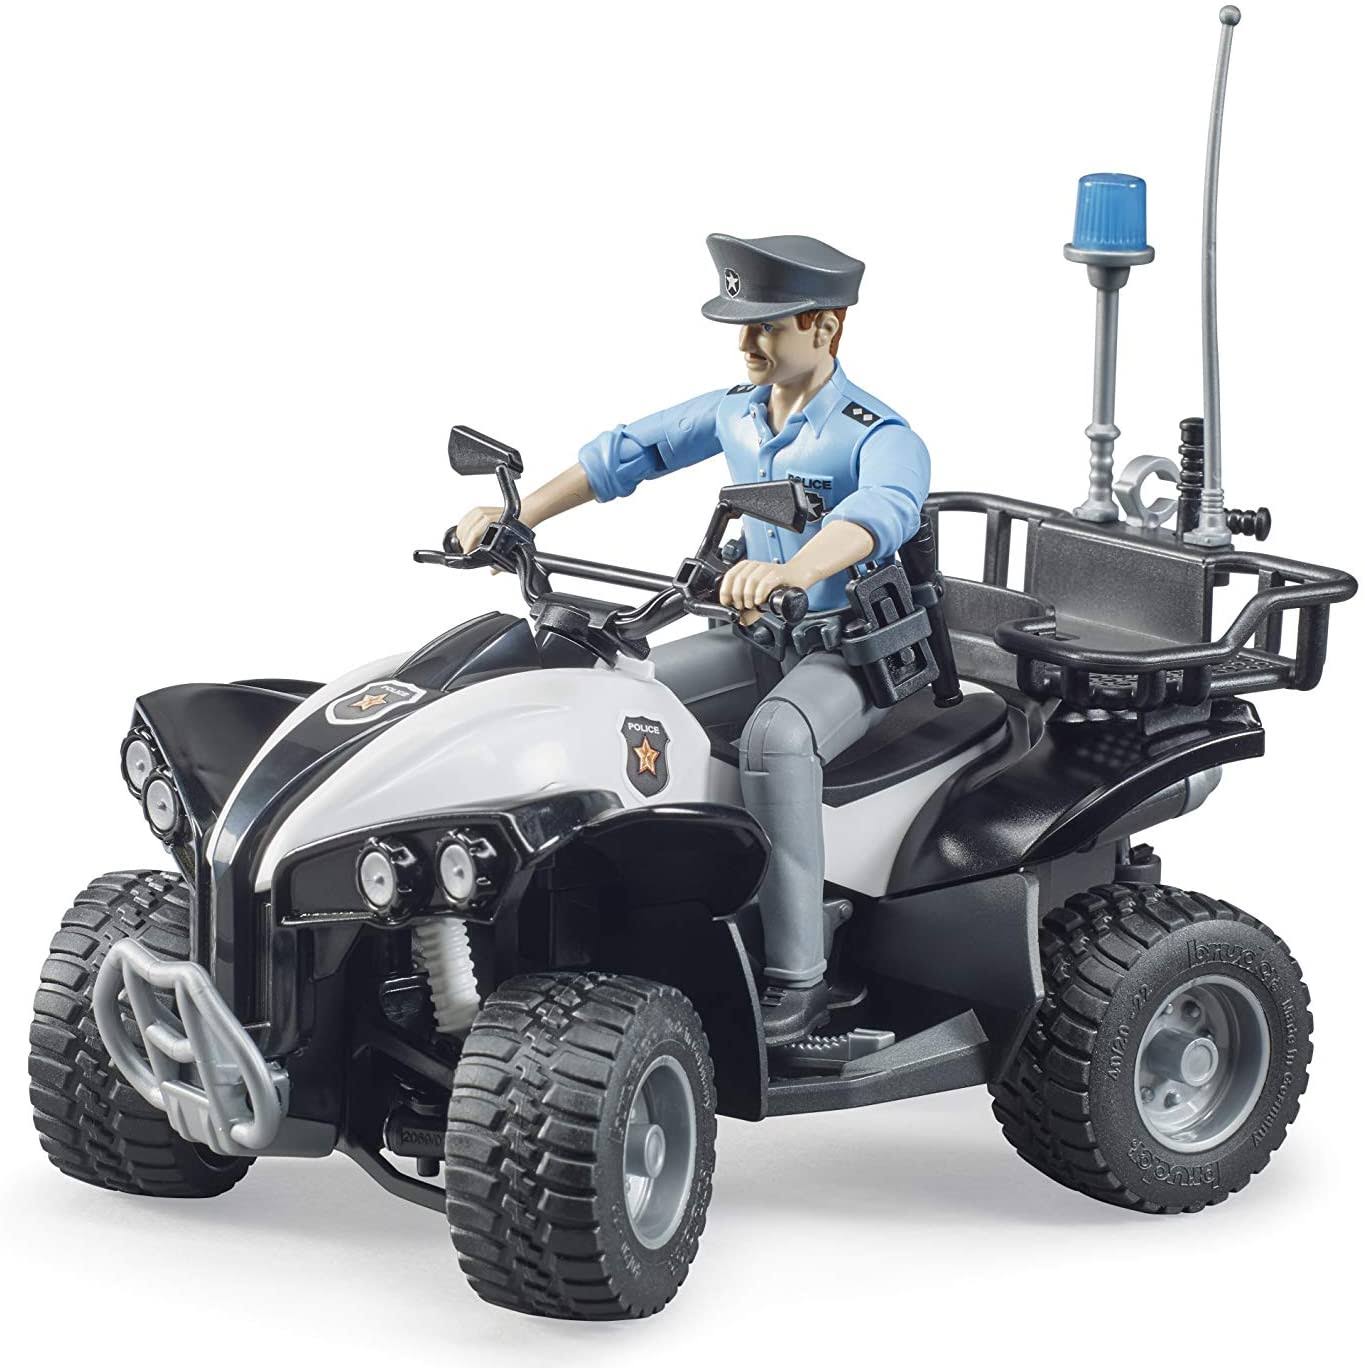 Bruder 63011 Police Quad W Light Skin Policeman and Accessories